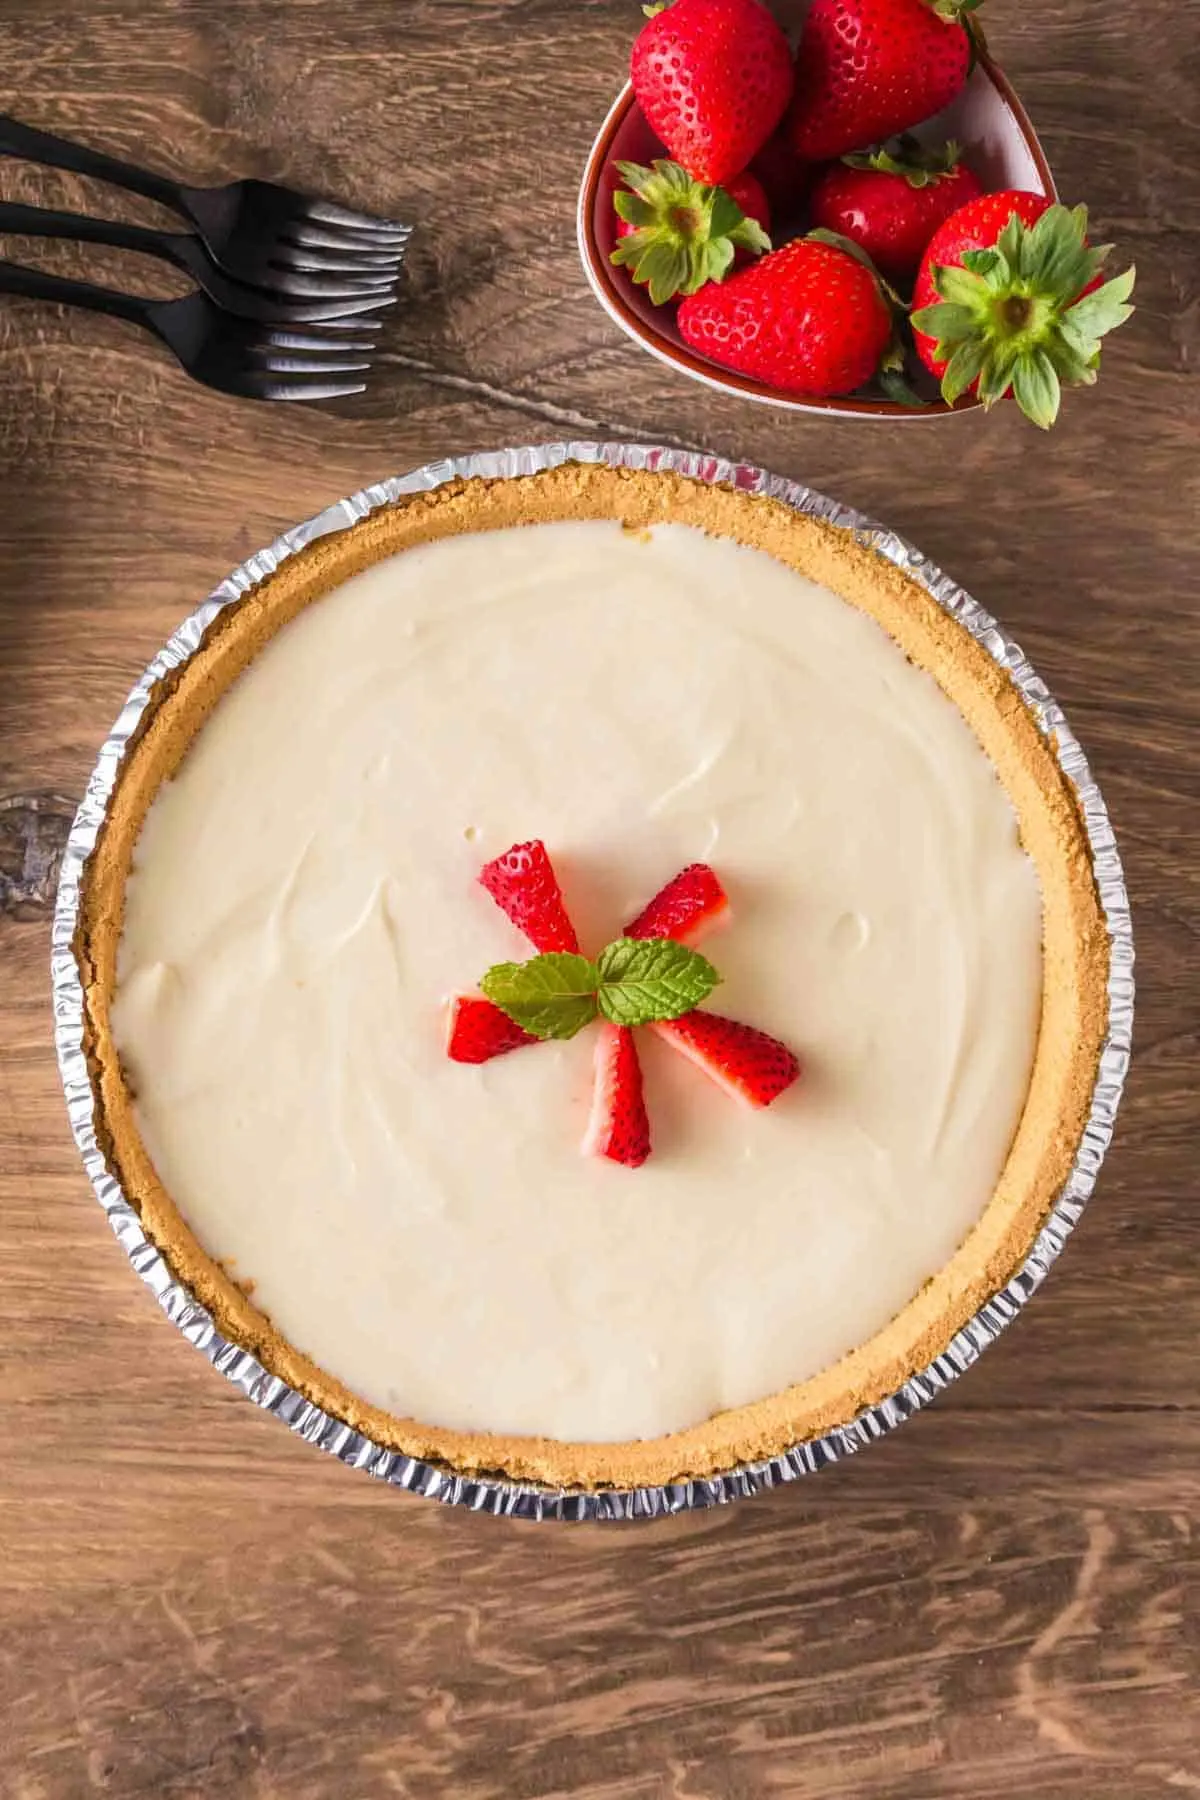 3 Ingredient Cheesecake is an easy no bake dessert recipe made with a graham pie crust, cream cheese and sweetened condensed milk.